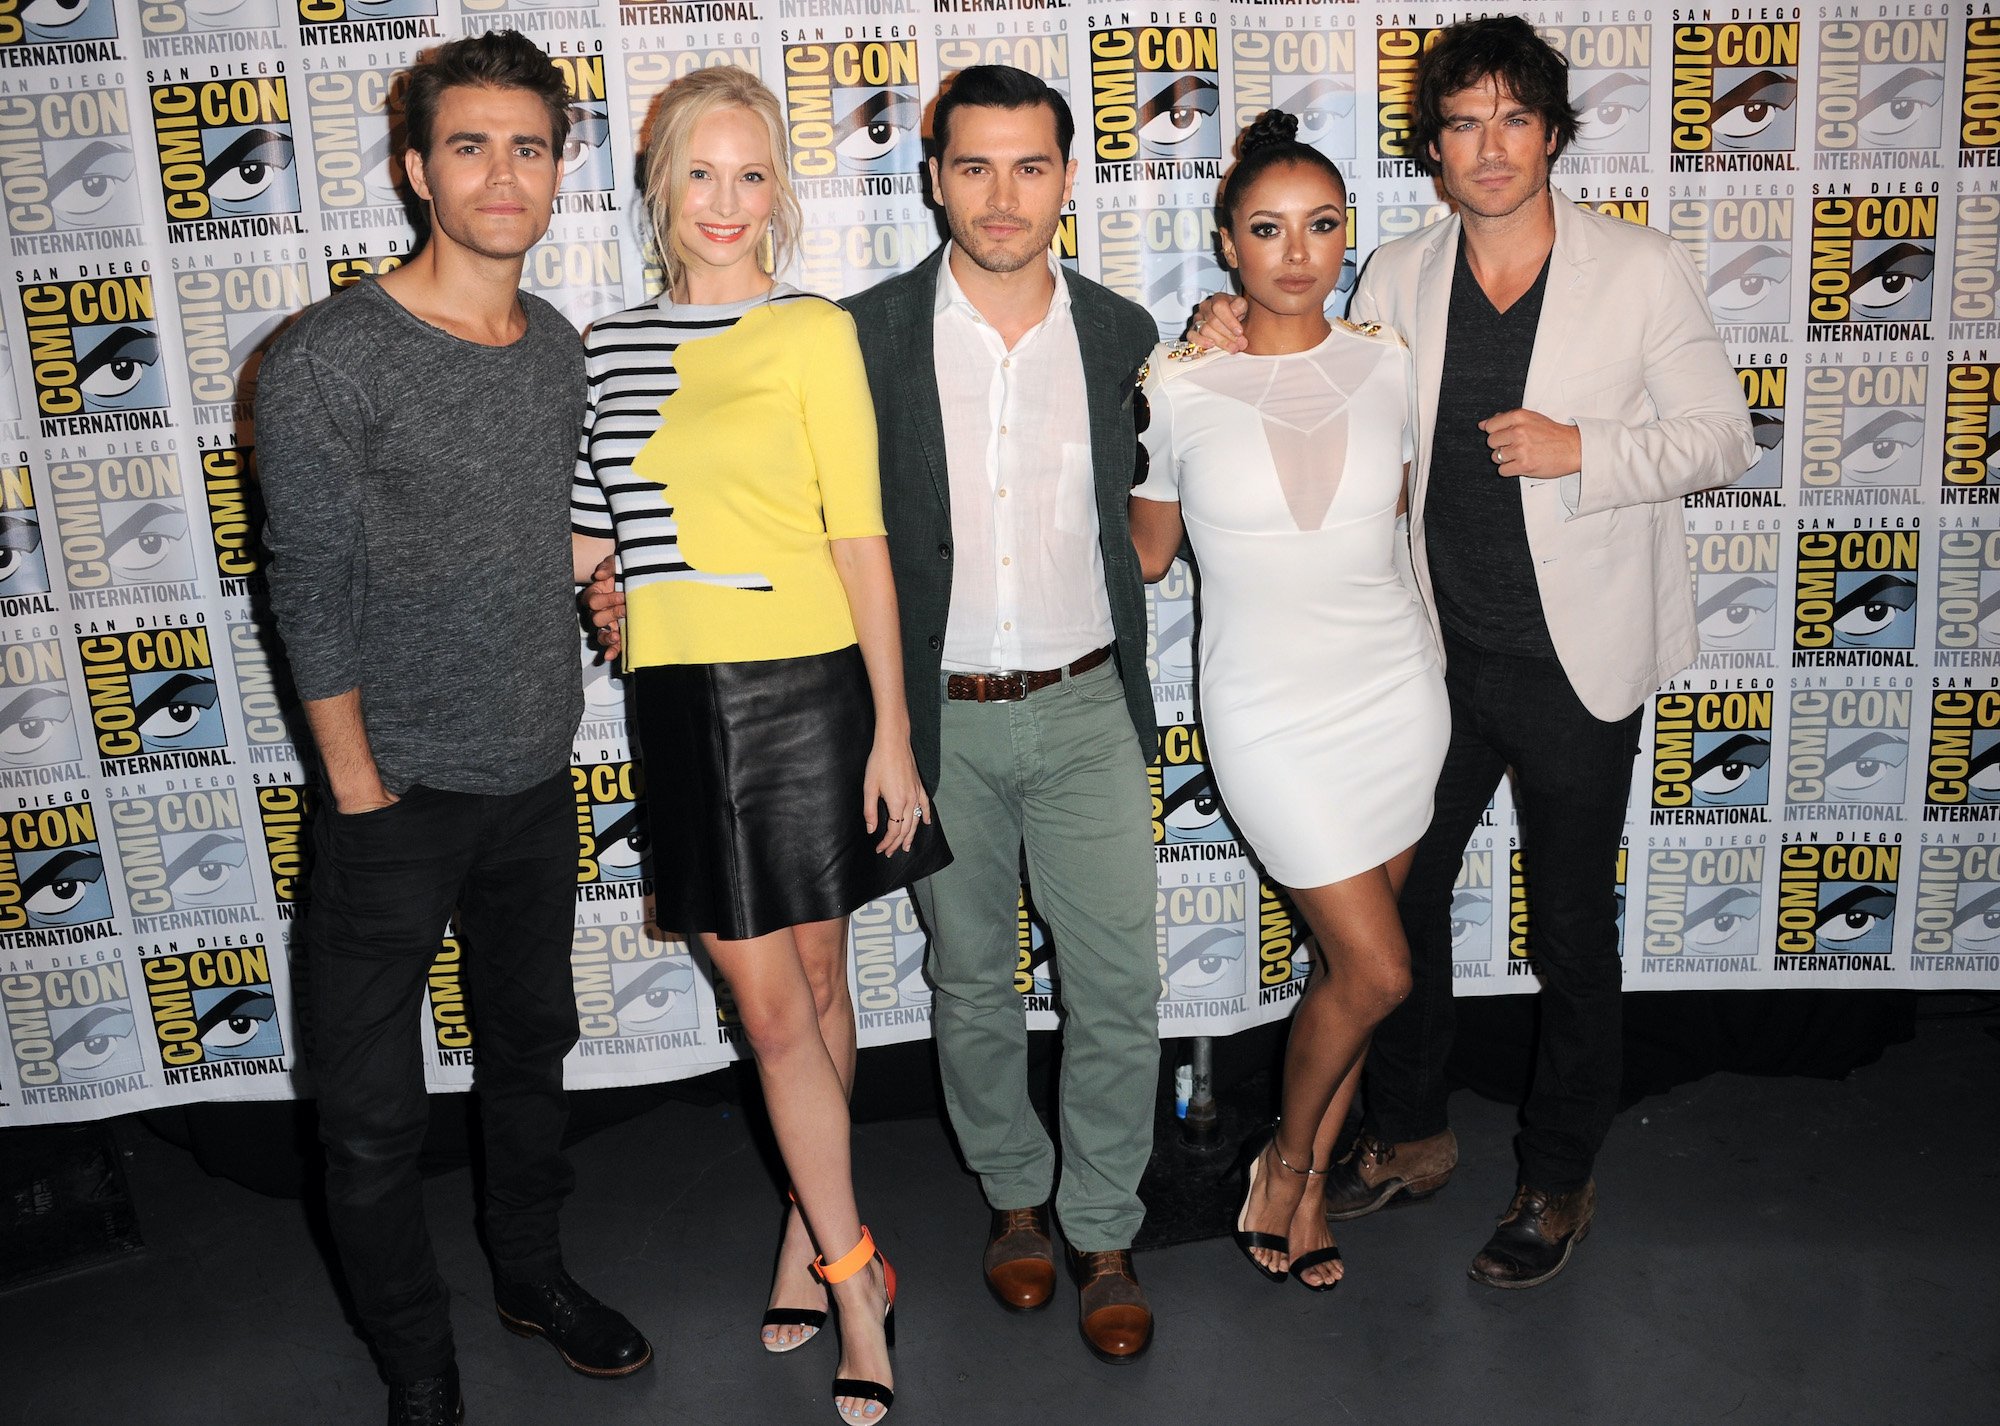 The Vampire Diaries cast in front of a ComicCon backdrop